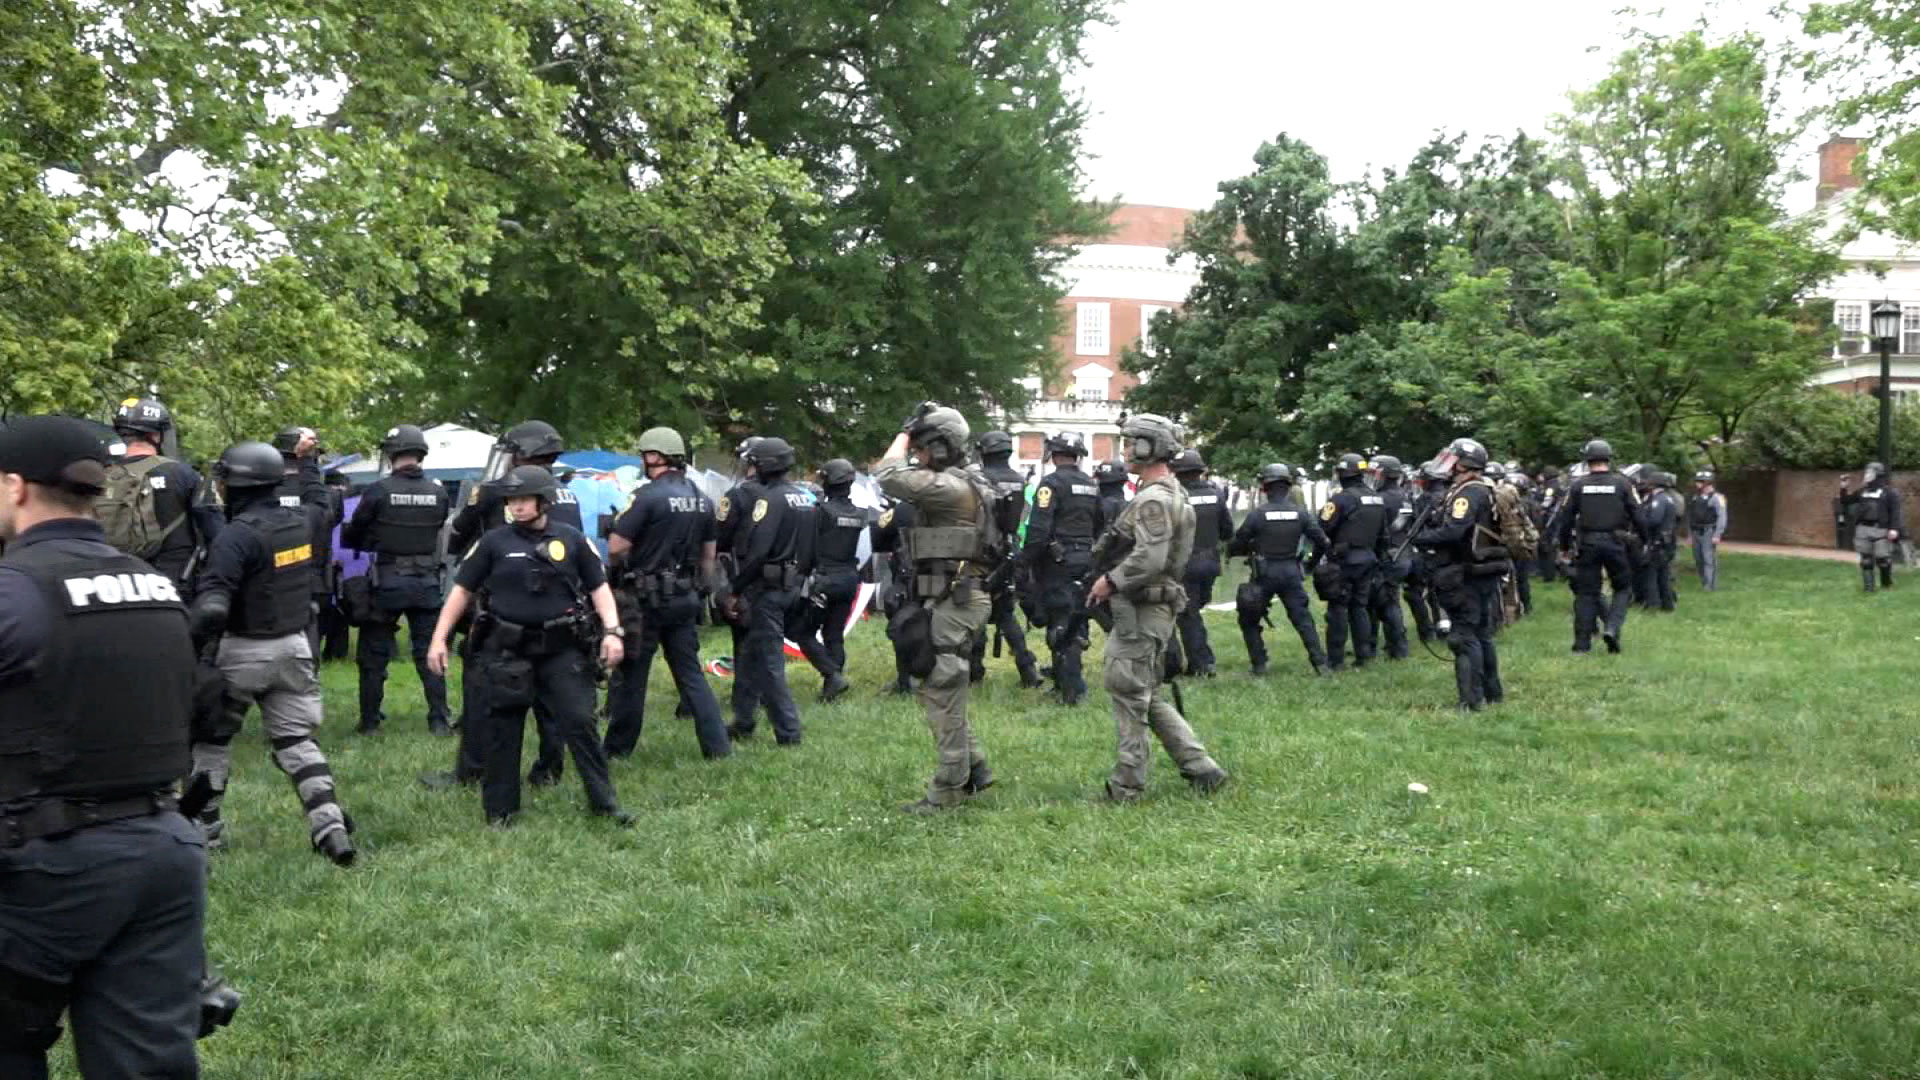 Police move toward people protesting in a pro-Palestinian encampment at the University of Virginia in Charlottesville on May 4.